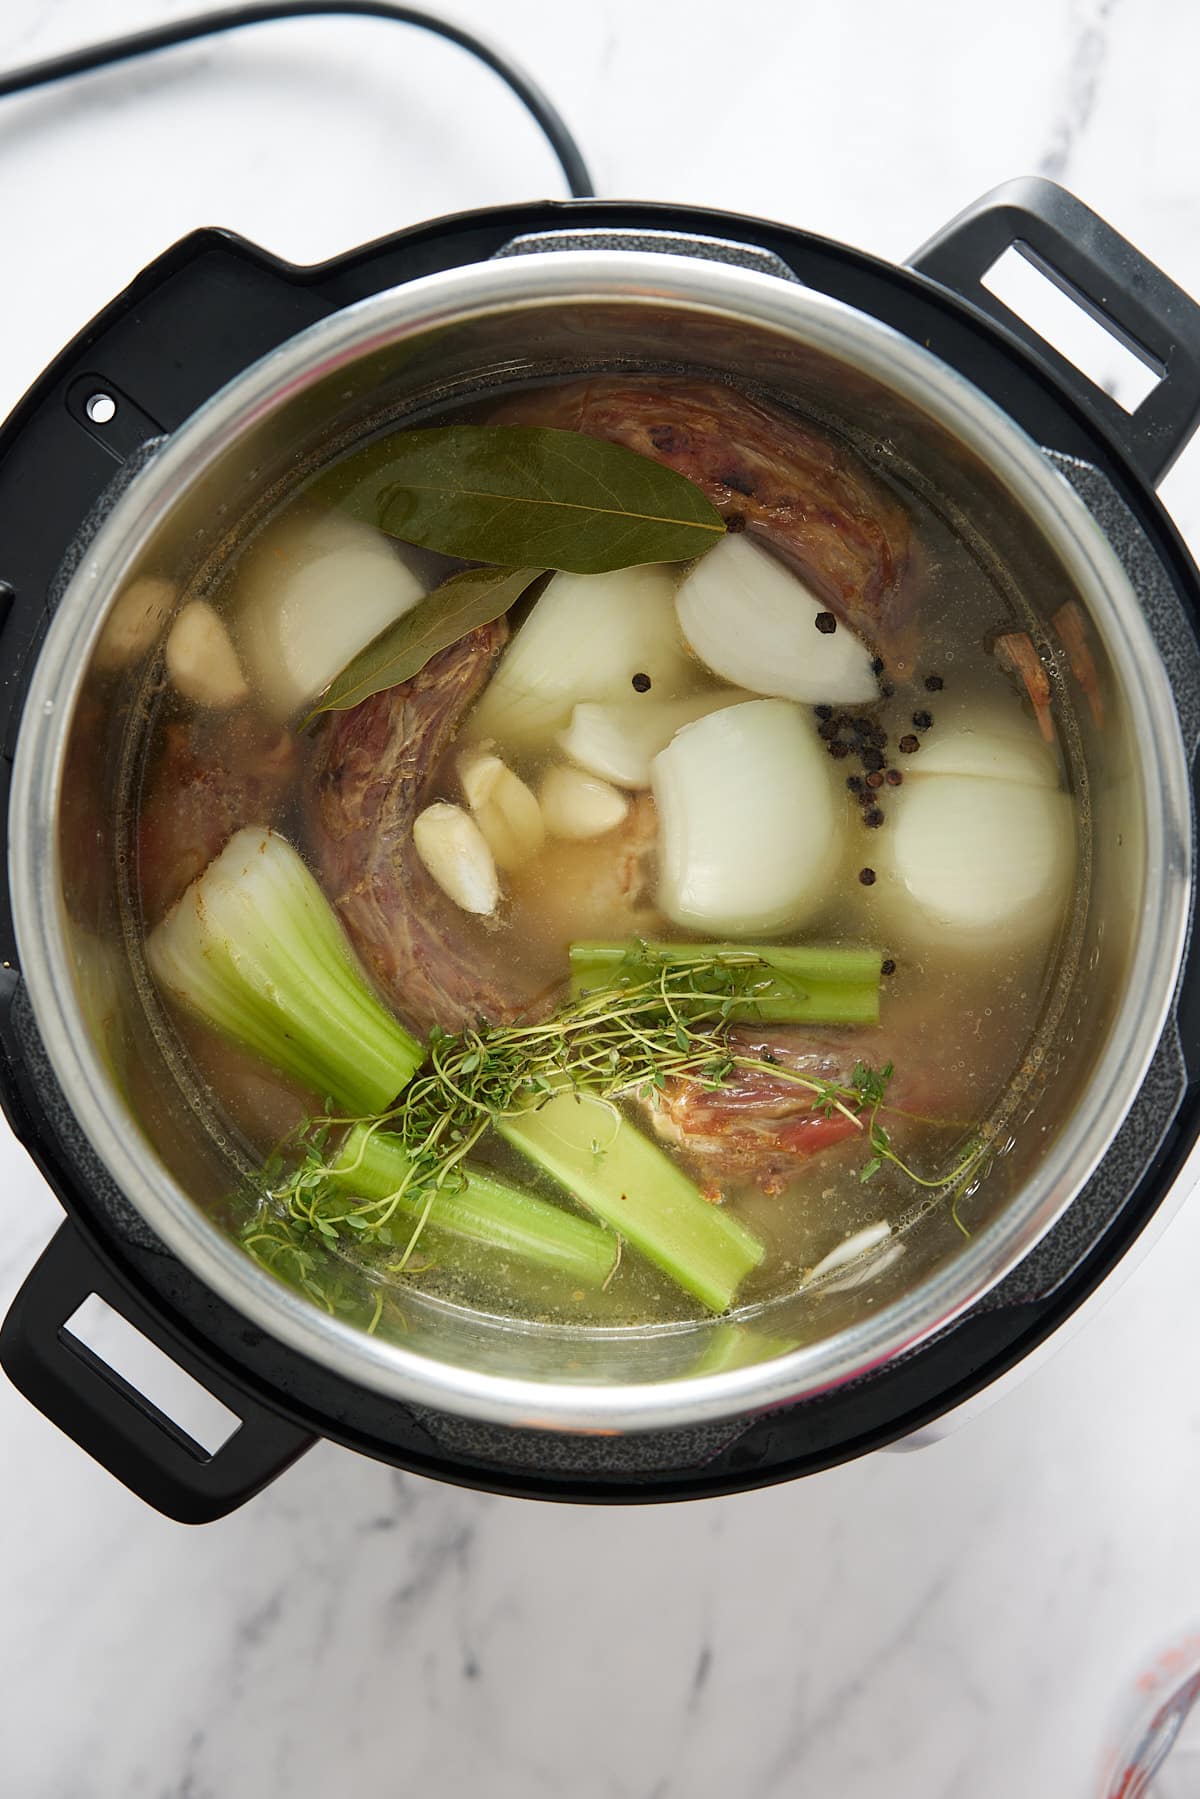 Pressure cooker pot containing turkey pieces, raw vegetables, herbs, spices and water